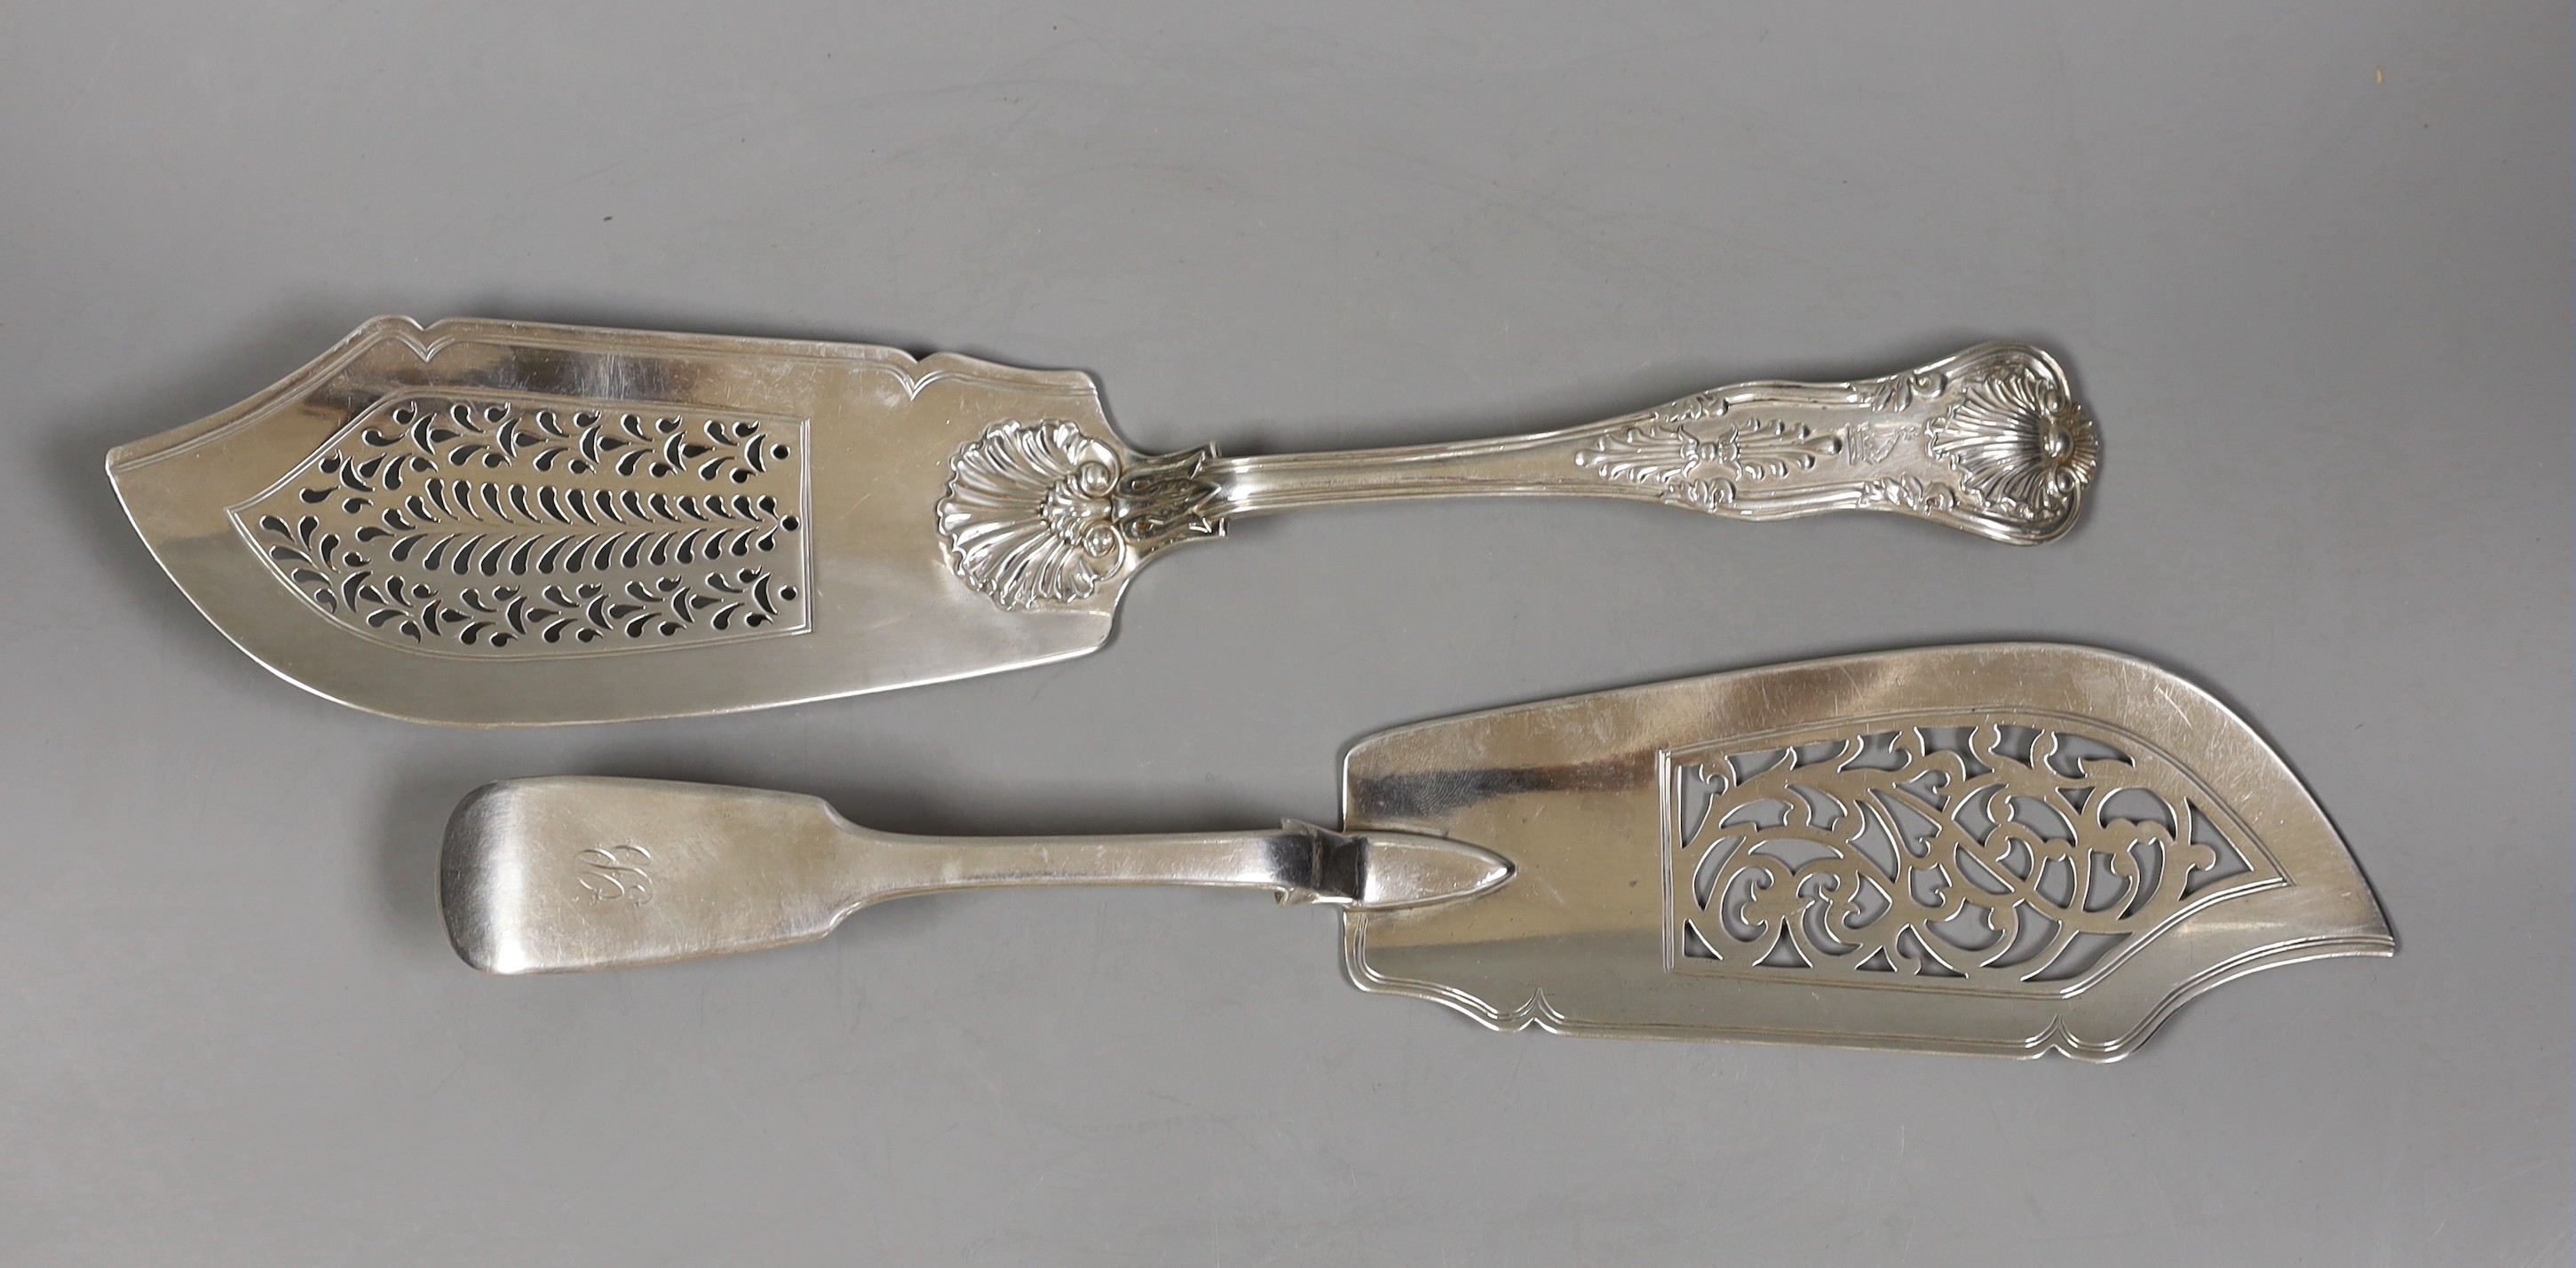 Two 19th century silver fish slices, Kings pattern by William Bateman, London, 1833, 32.1cm and fiddle pattern, William Eaton, London 1844